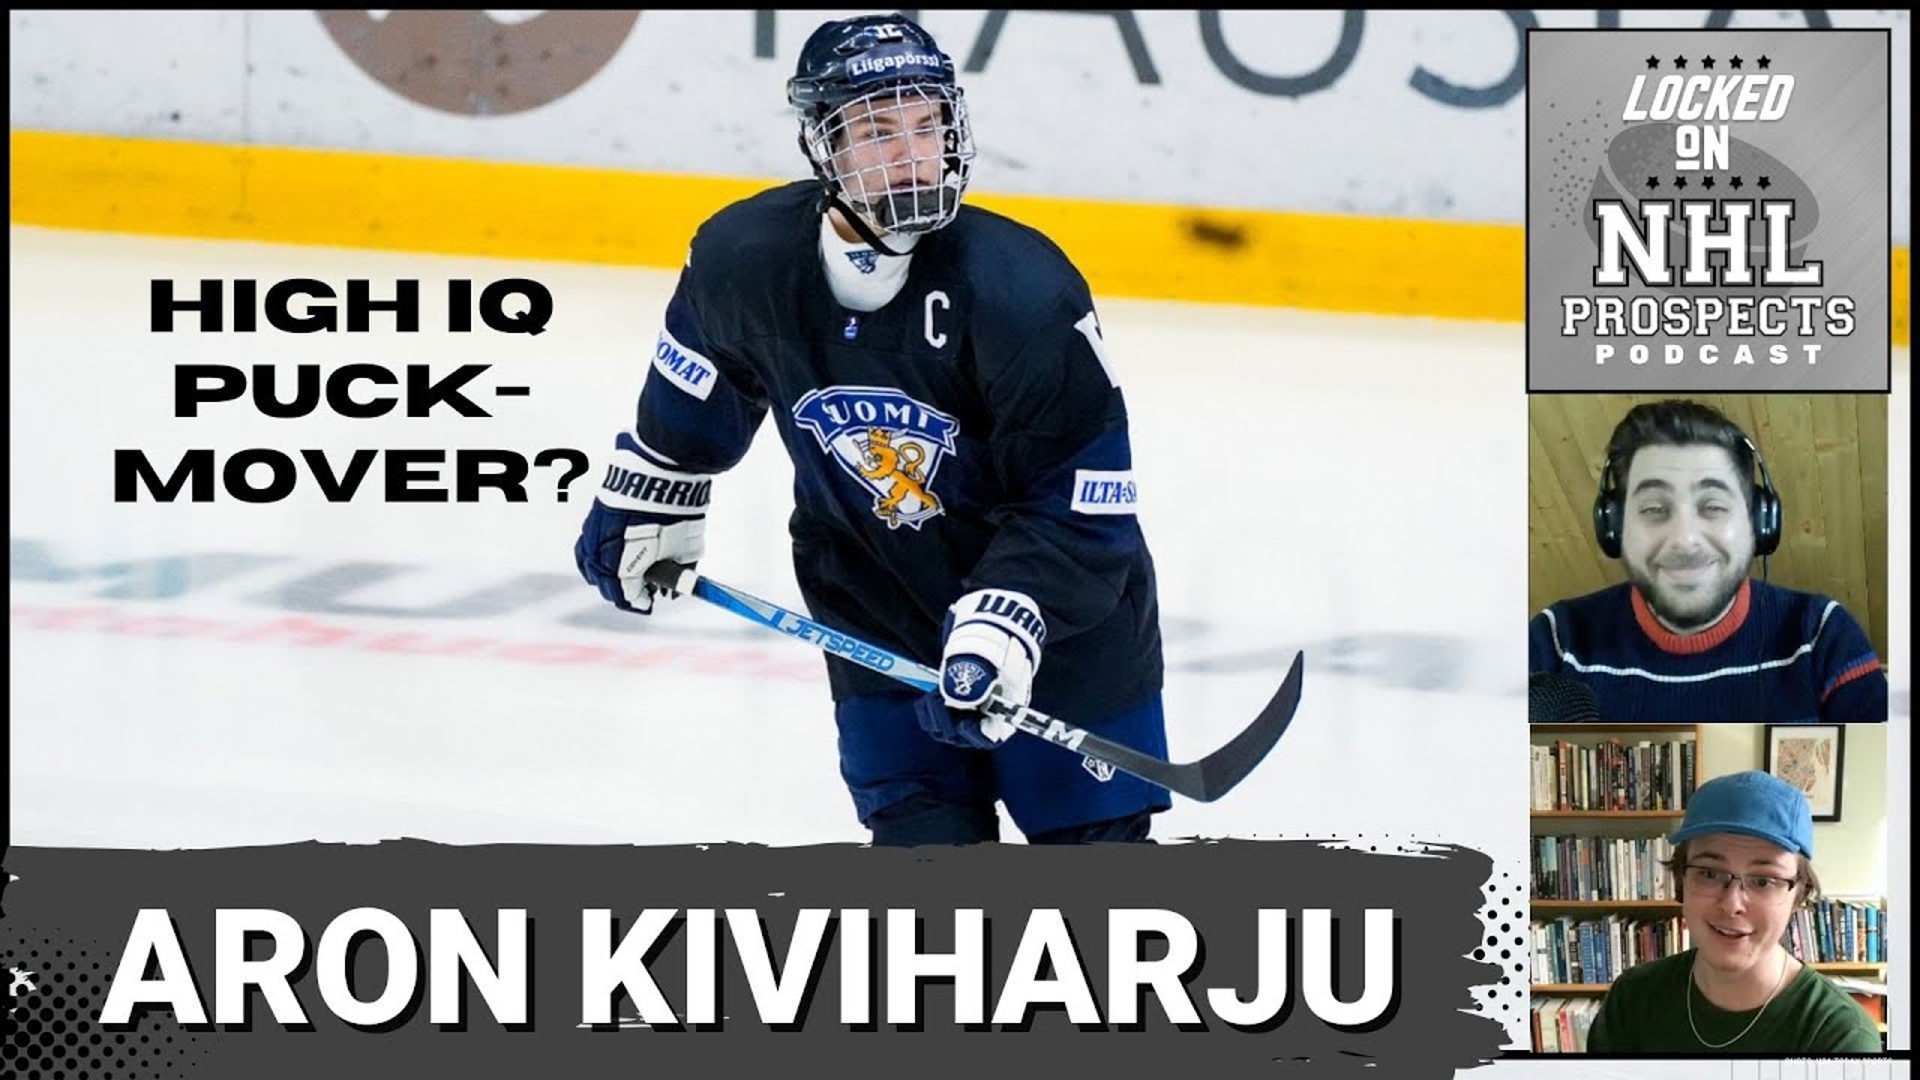 In this episode of the Prospect Spotlight series, our scouts take a half-hour deep dive into the game of a high-IQ puck-moving defenseman: Aron Kiviharju!